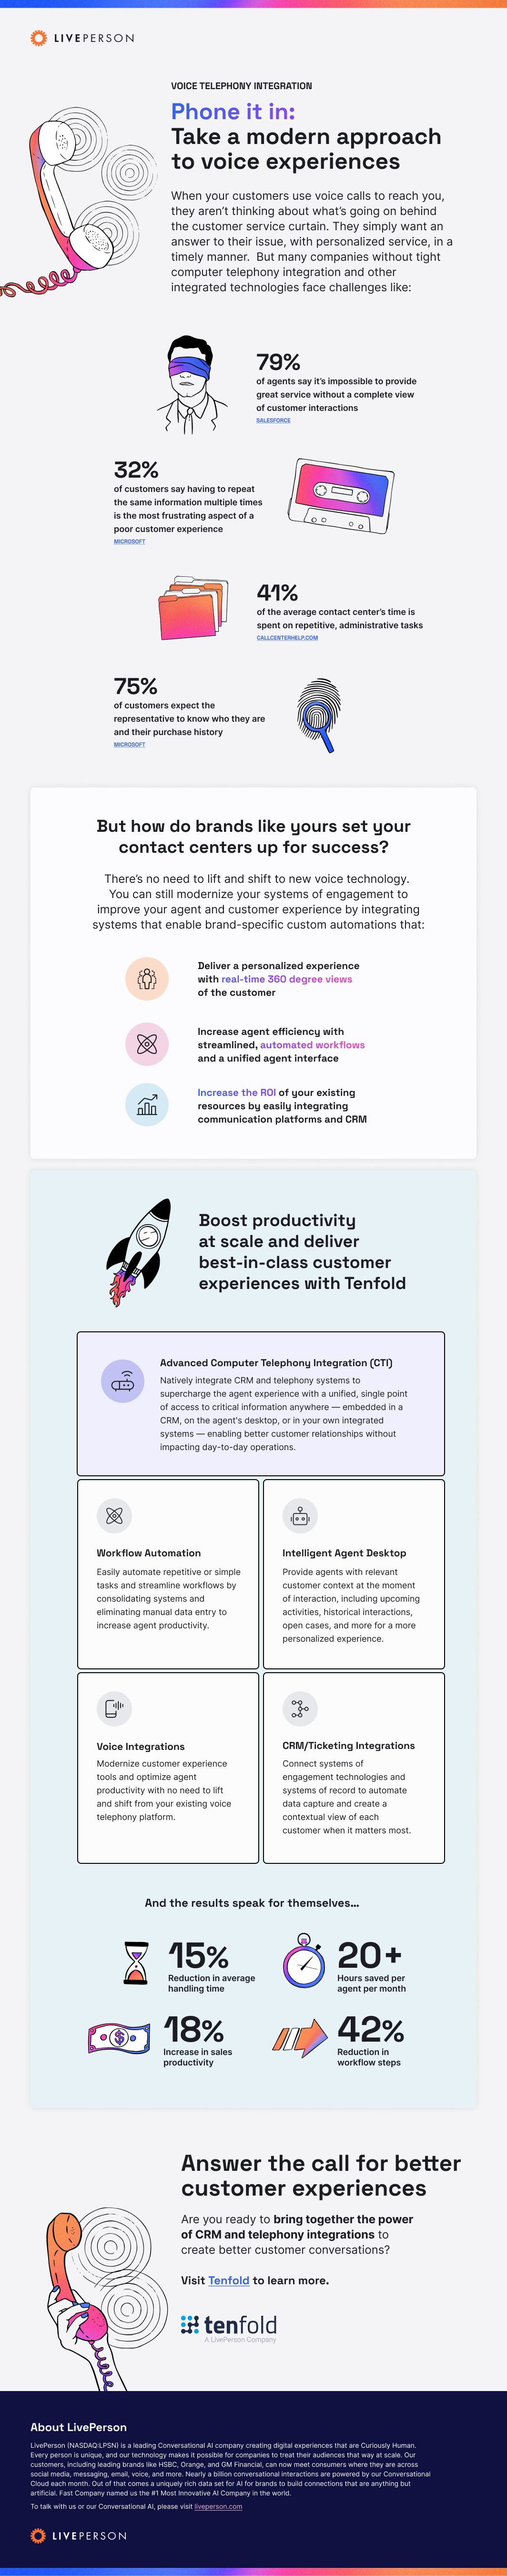 Computer telephony integration infographic for call centers and more